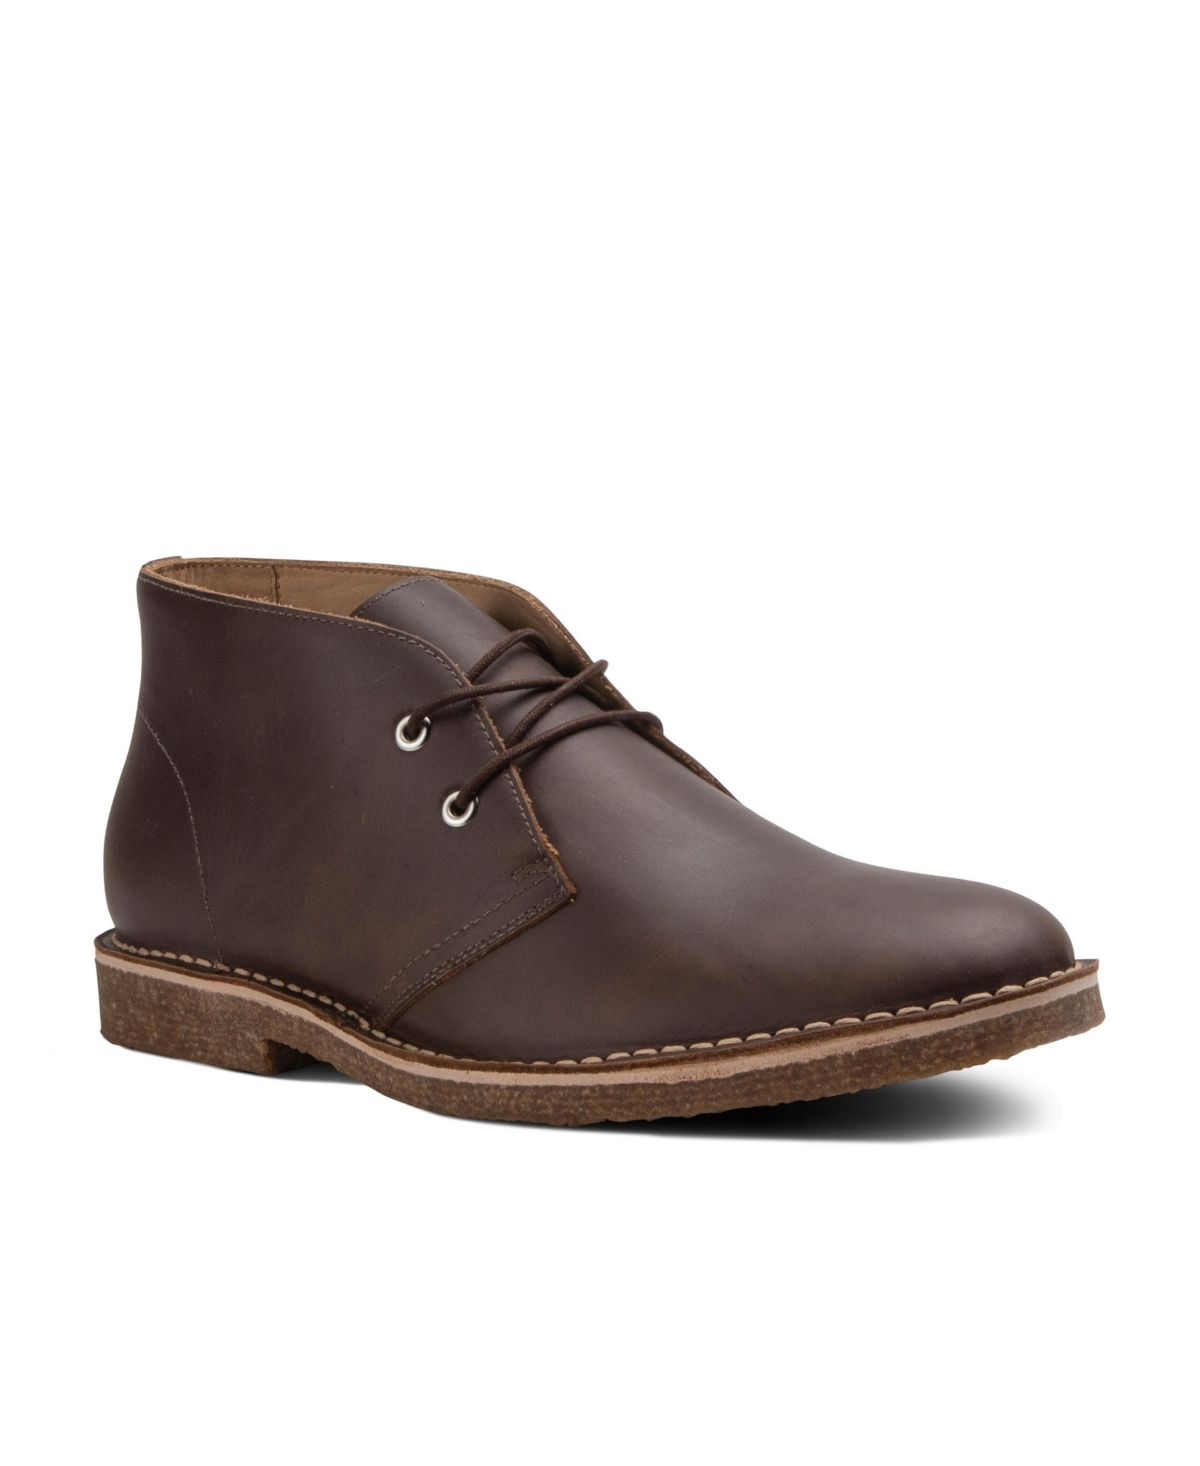 BLAKE MCKAY MEN'S TOBY CASUAL TWO-EYE DESERT CHUKKA BOOTS WITH CREPE SOLE